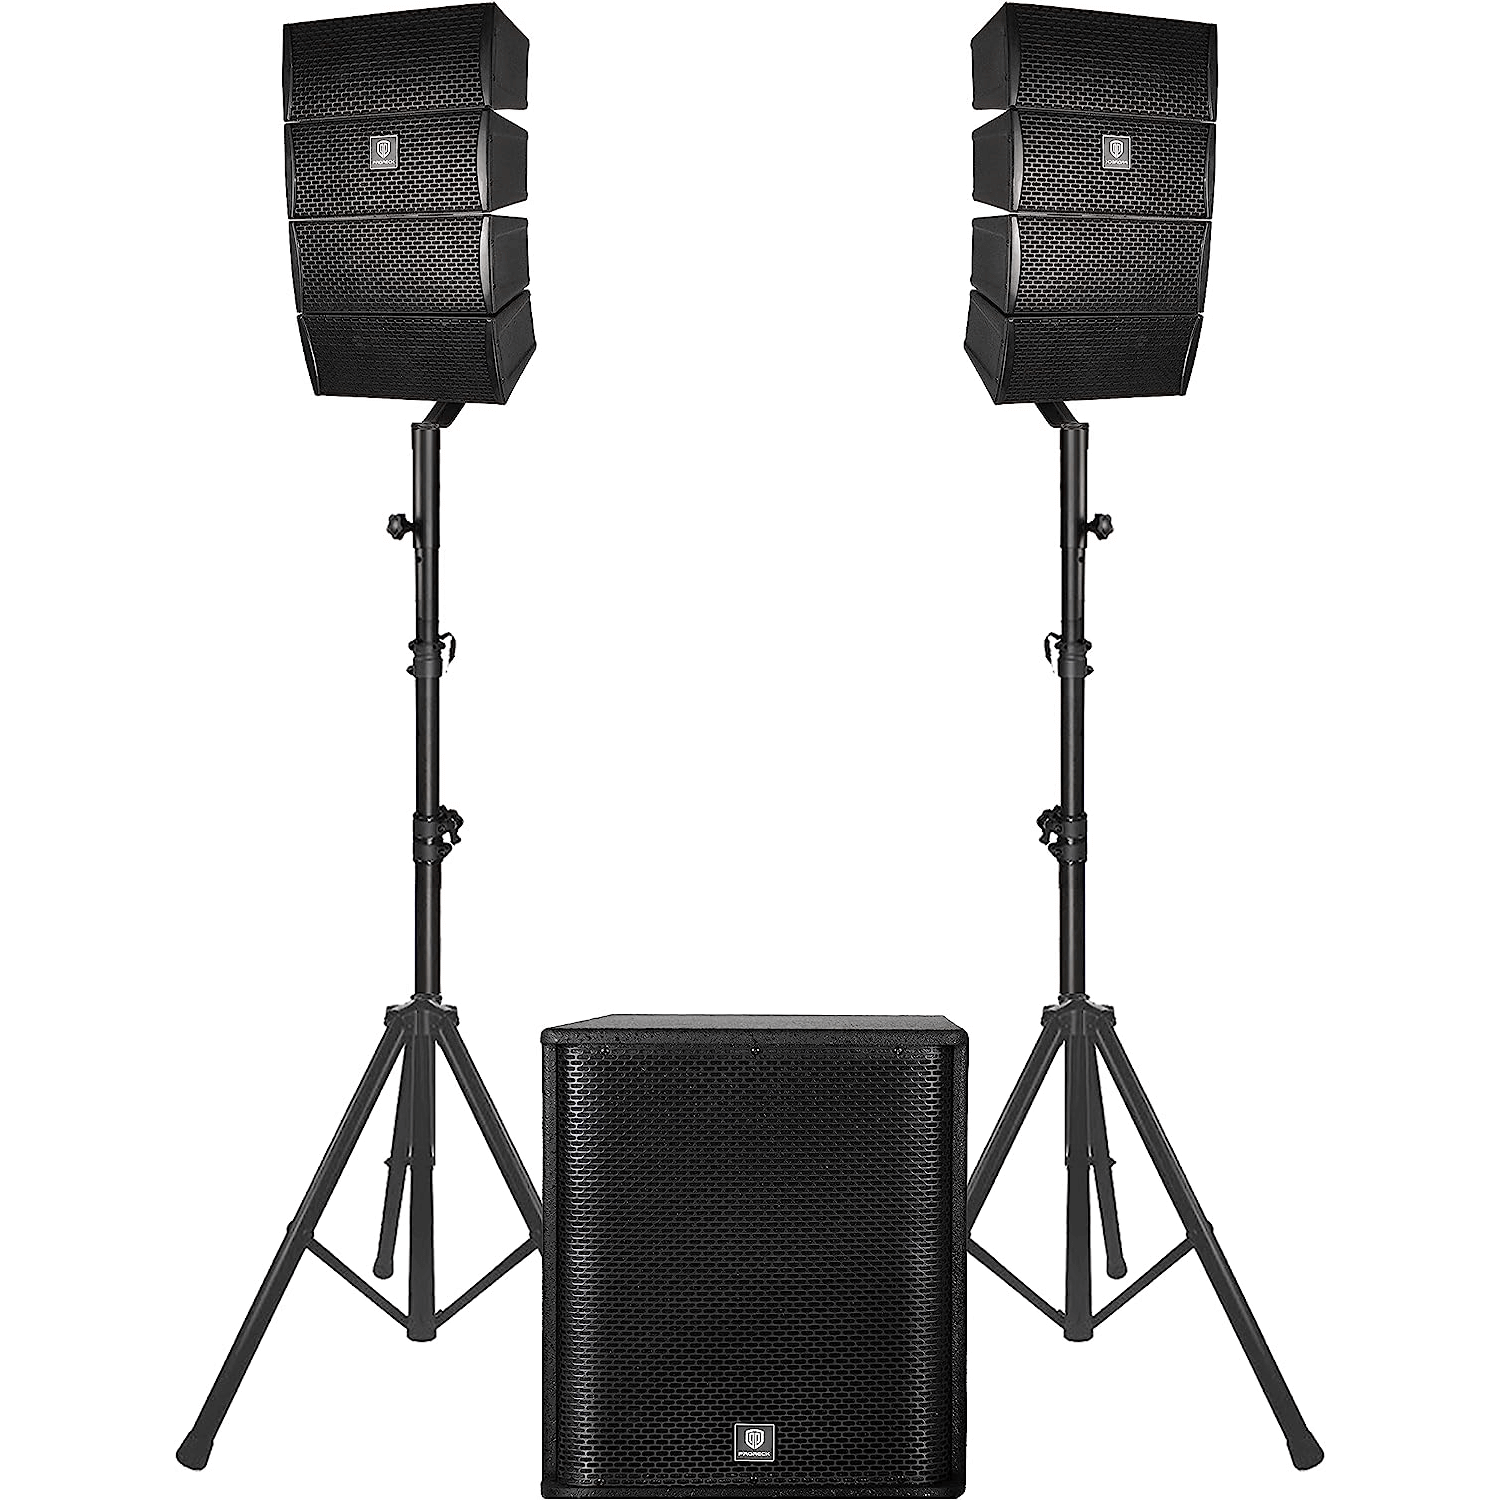 PRORECK Club 3500 | Bluetooth 3500W Party PA System |18''SUB|18 inch subwoofer